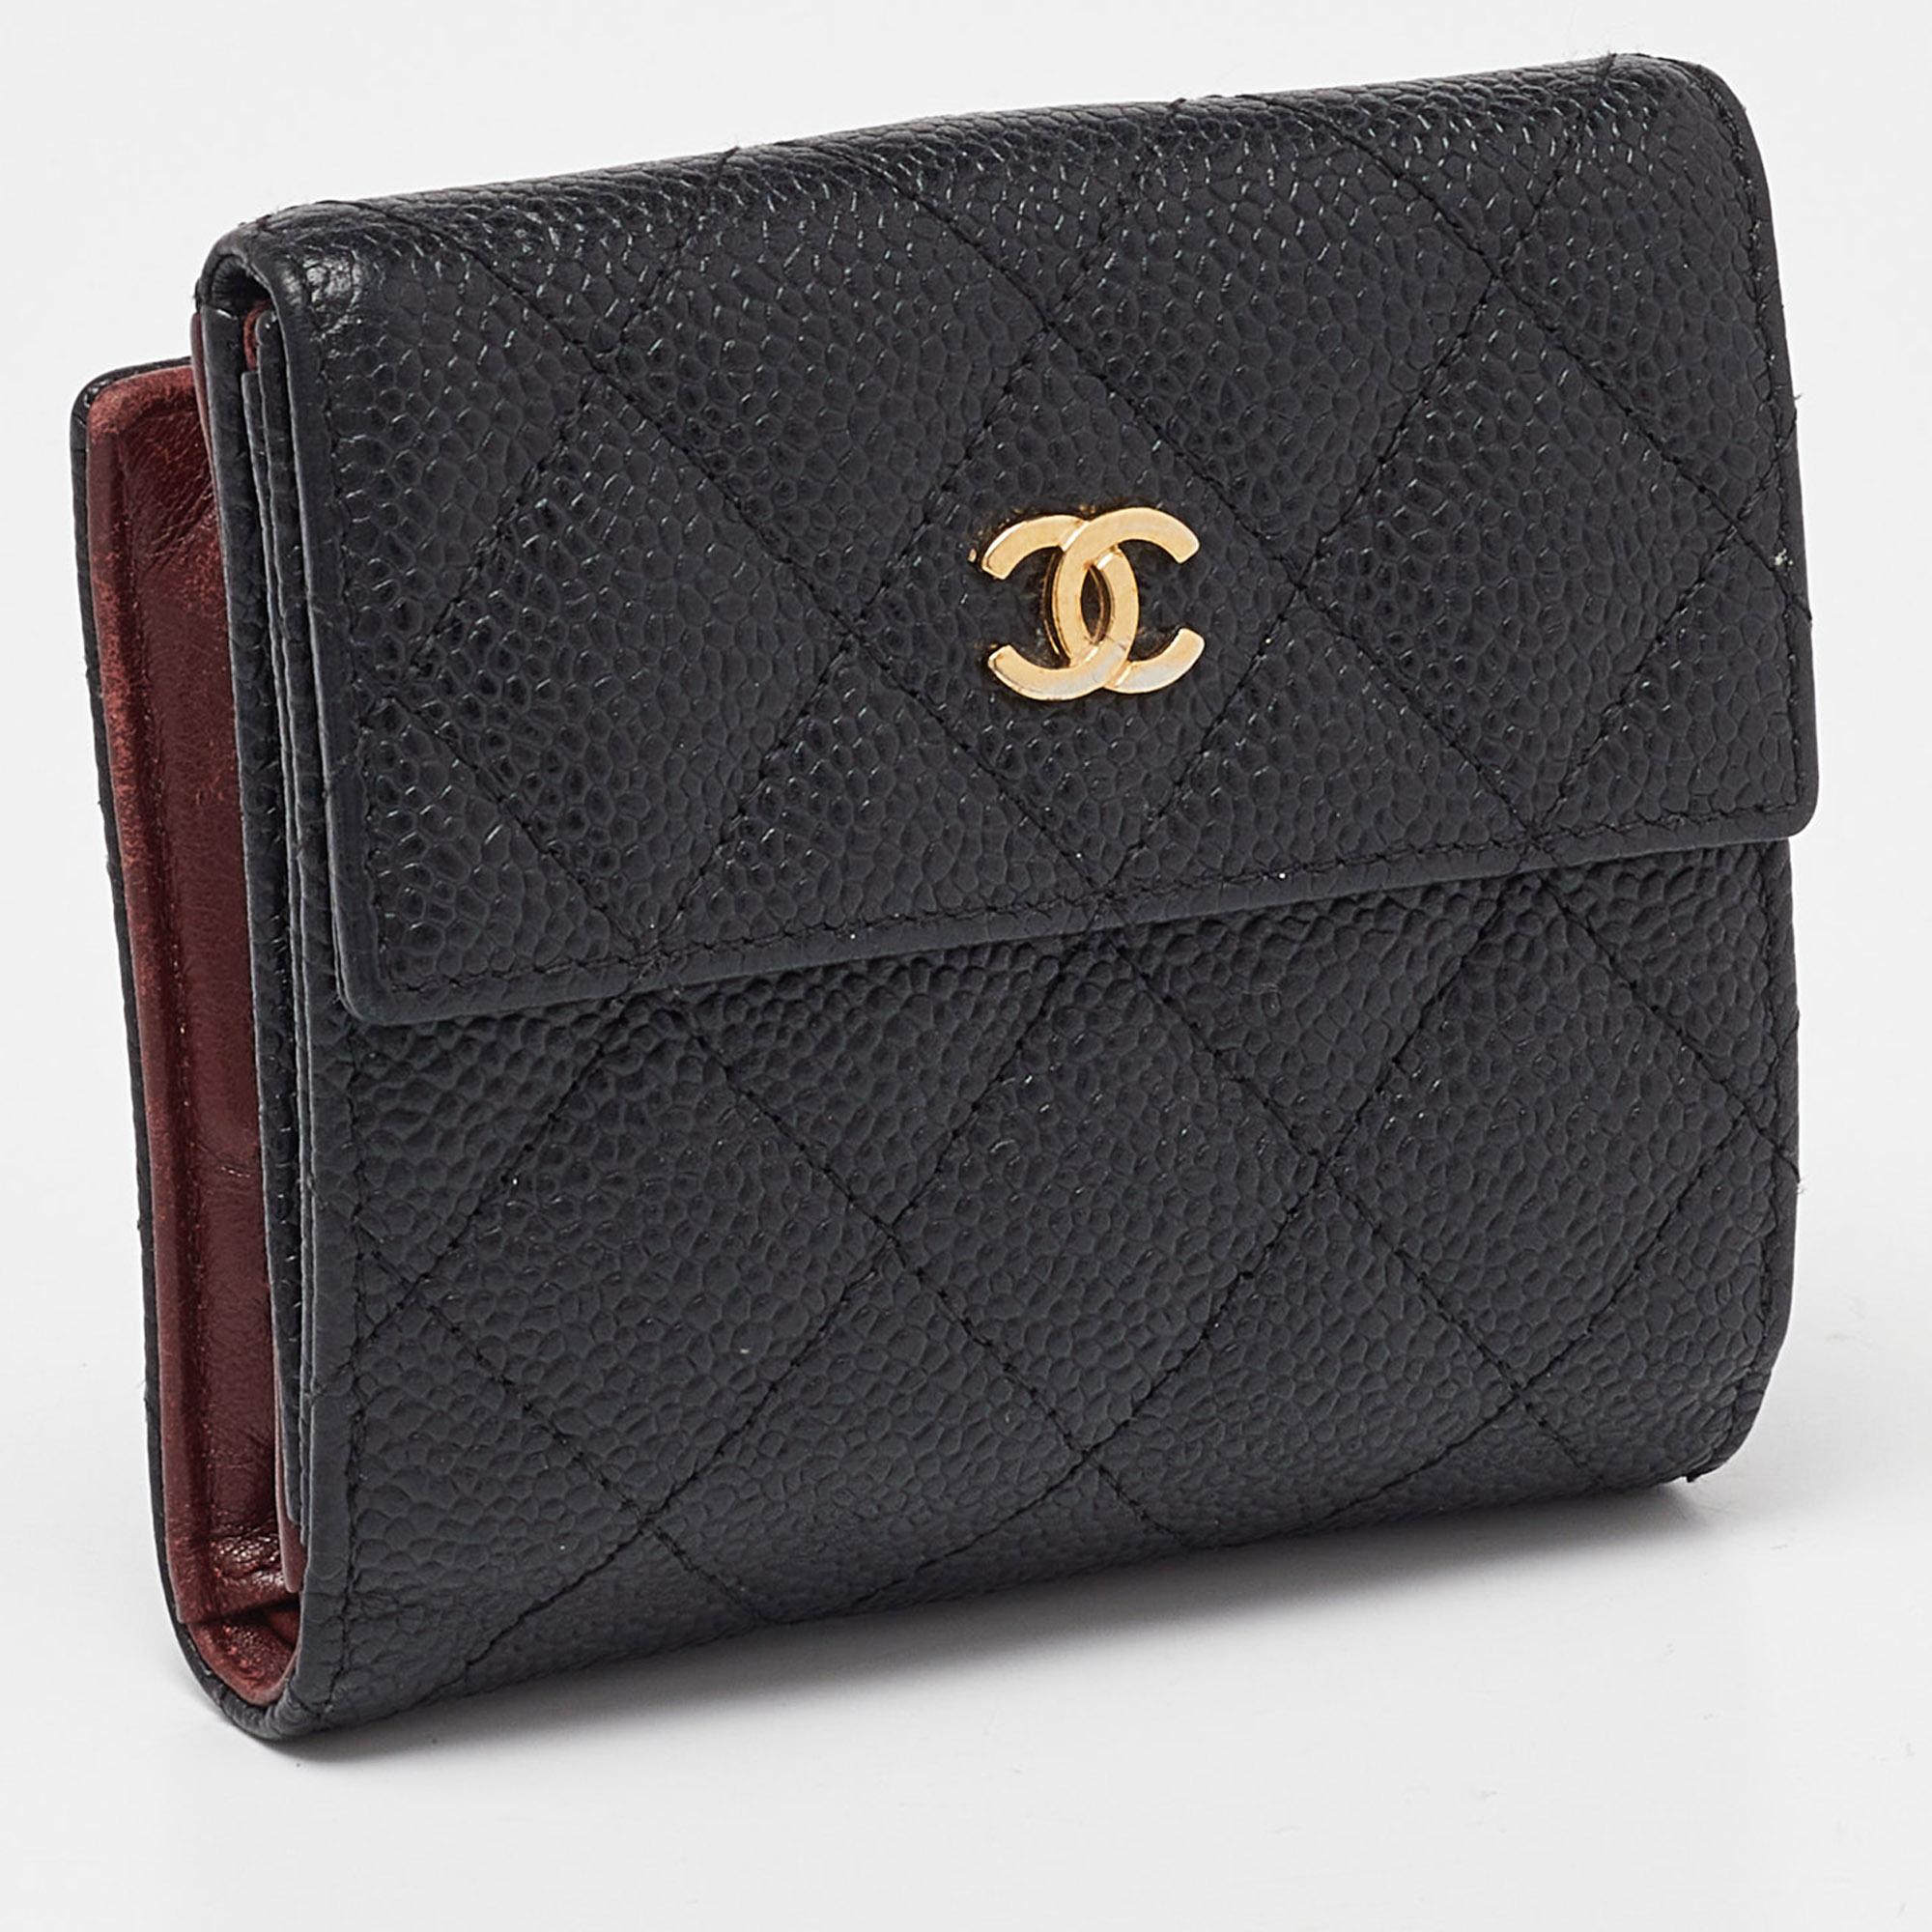 This gorgeous wallet from the house of Chanel is crafted from leather and carries the signature quilted pattern all over the exterior. Styled with a CC-adorned flap, the wallet is equipped with card slots and a pocket to carry your necessities.